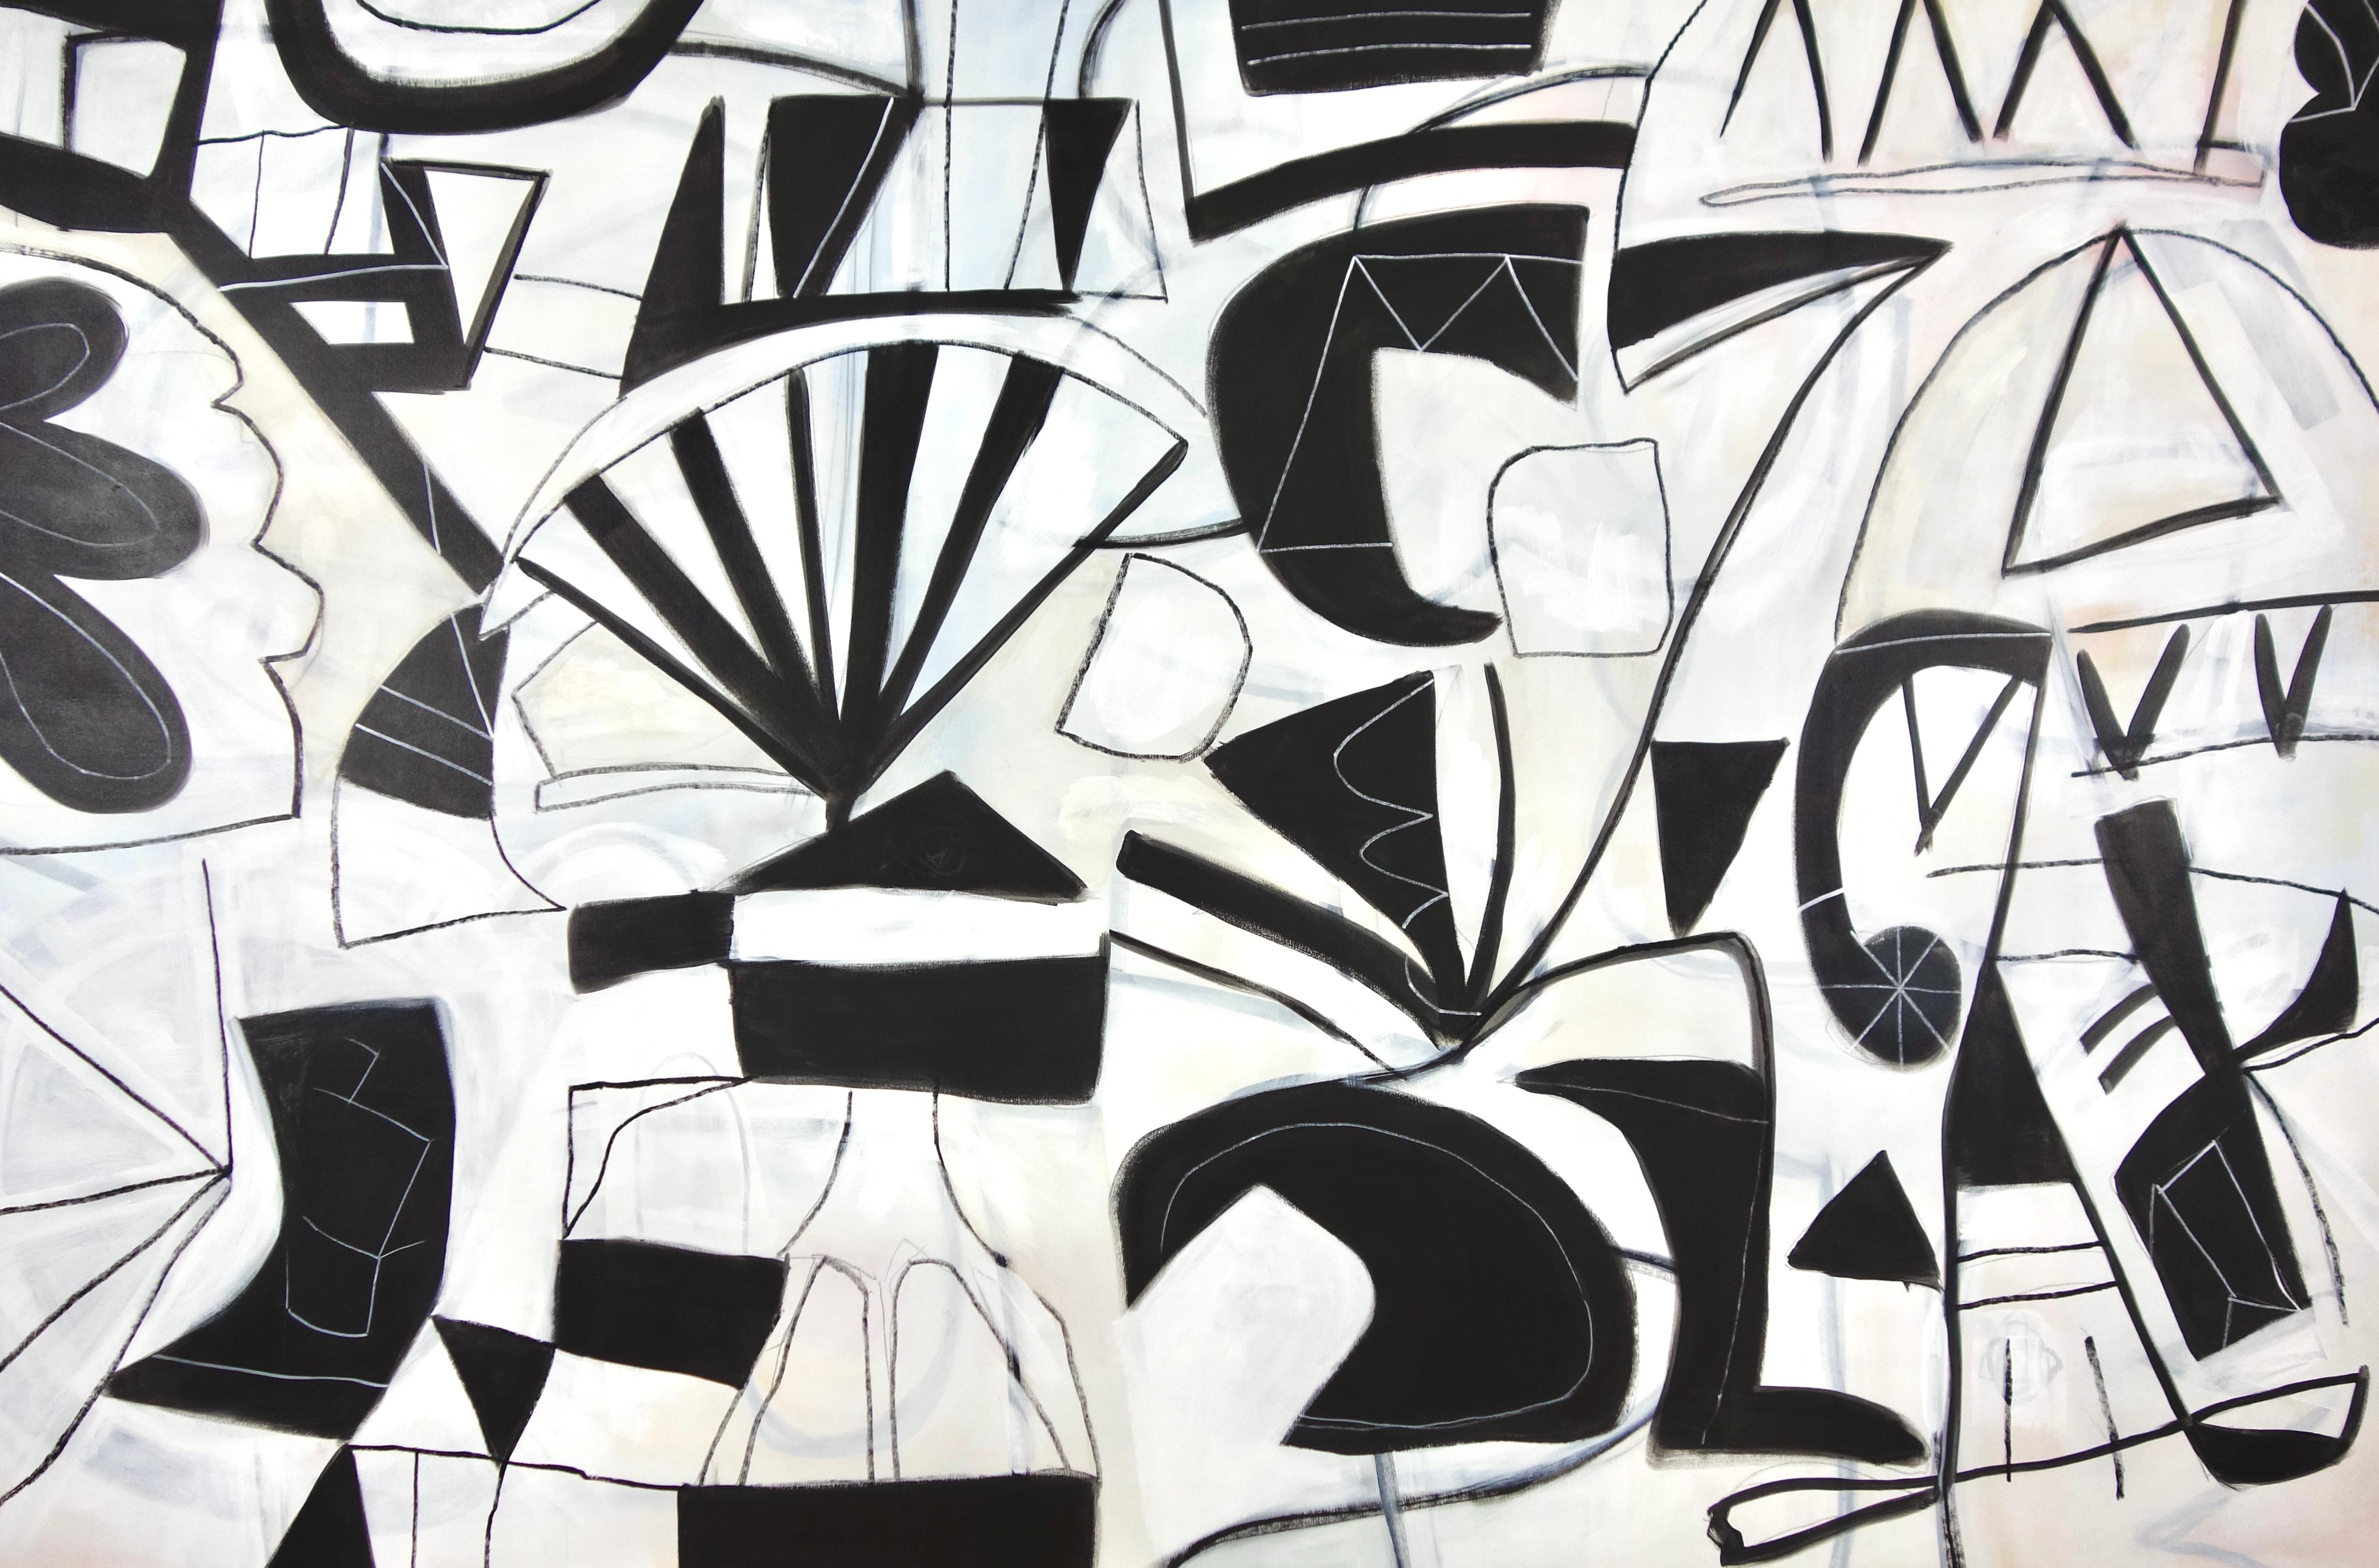 "Findings" is an exciting abstract of simple organic and geometric forms and gestural lines to create a sense of movement, depth, and flow. A contrasting palette layers black and white over pale warm ecru underpainting. It's energetic and